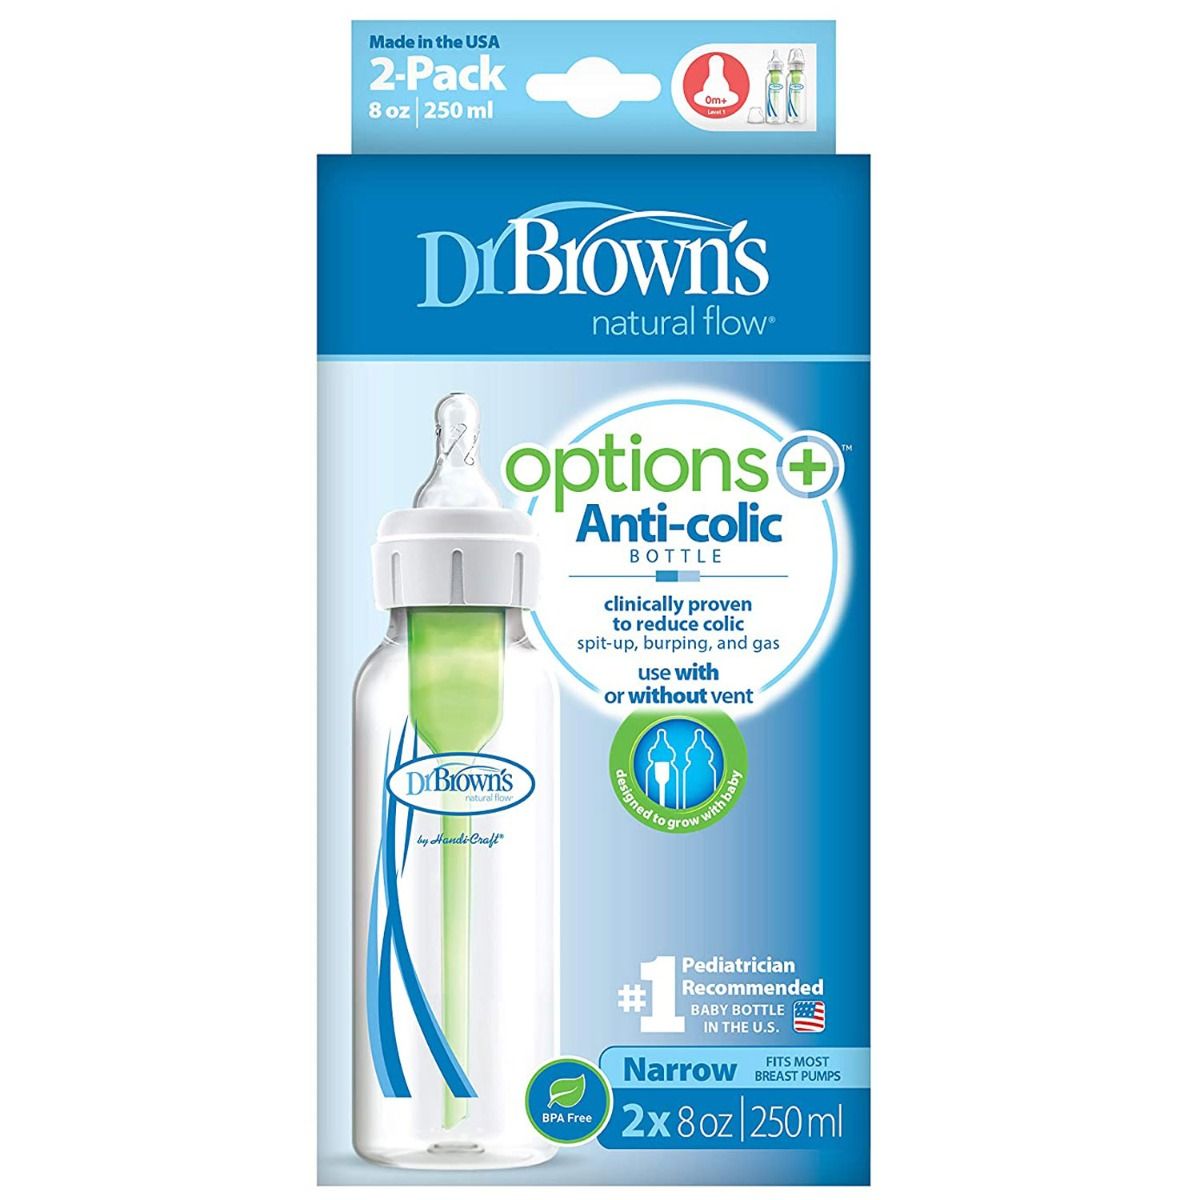 Buy Dr.Brown's Options+ Anti-colic Narrow Bottle 250 ml Online